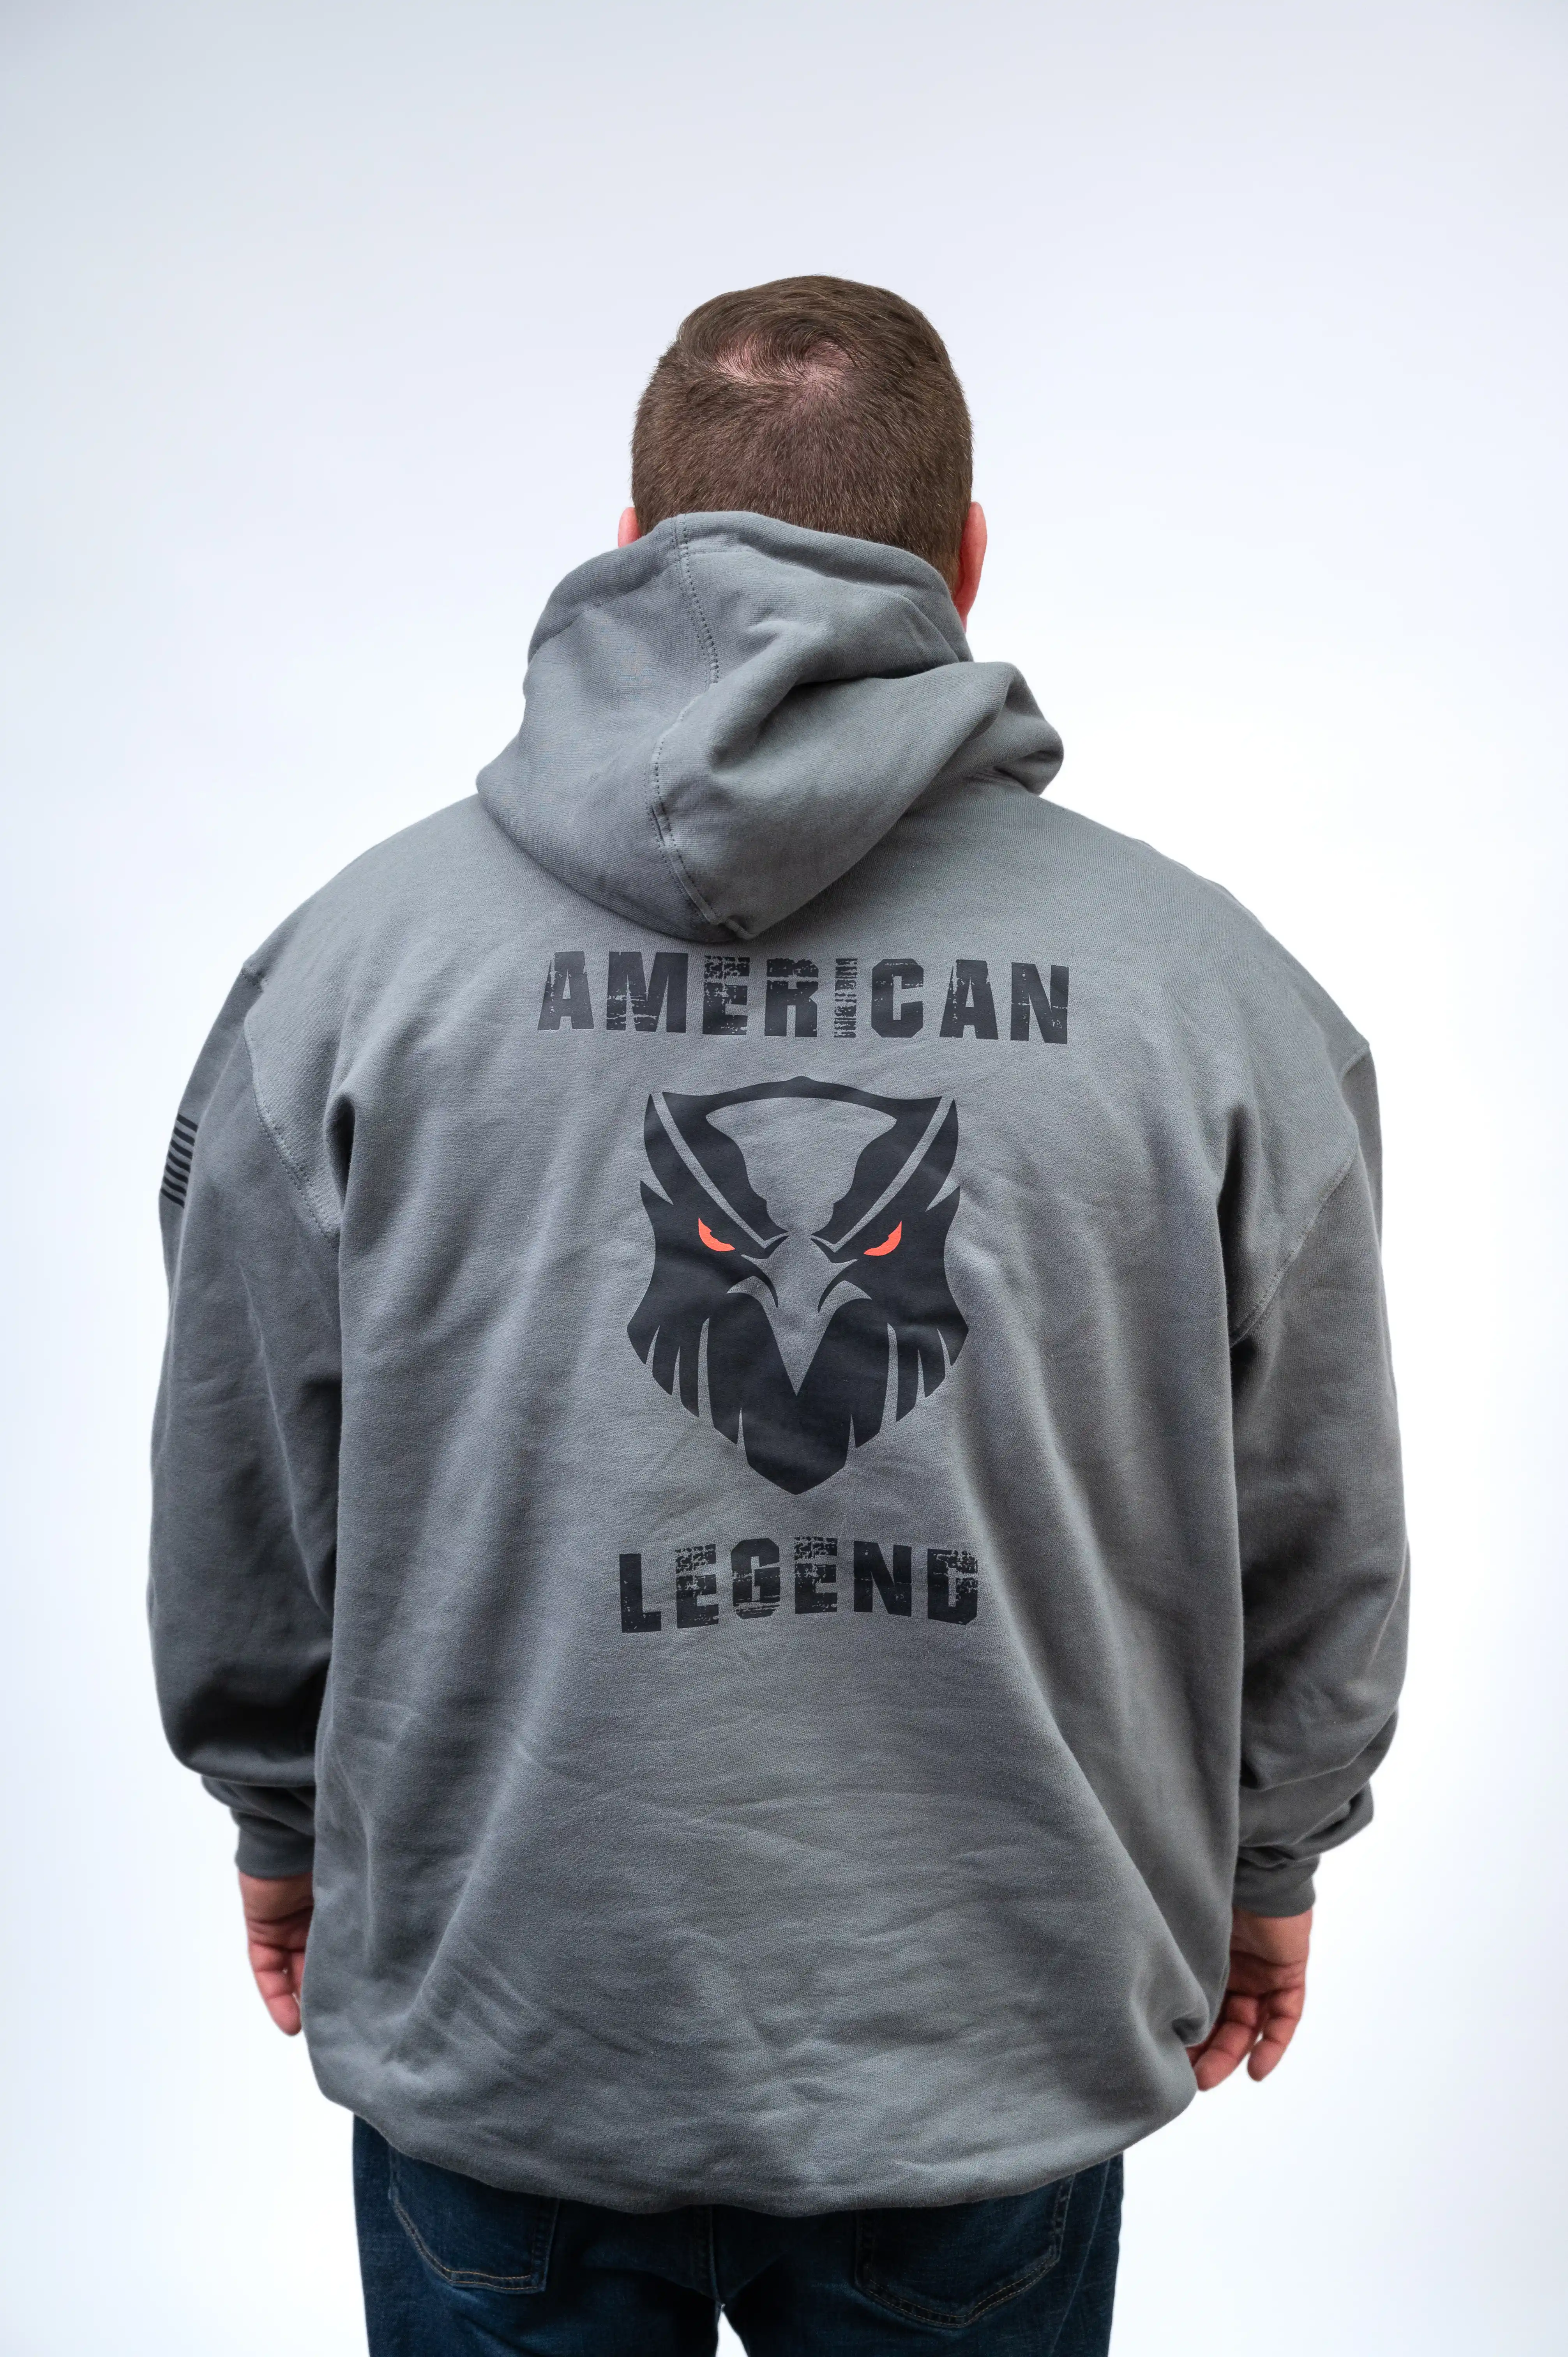 Man standing with back facing the camera, wearing a grey hooded sweatshirt with the words "AMERICAN LEGEND" and a graphic of an eagle face on it.